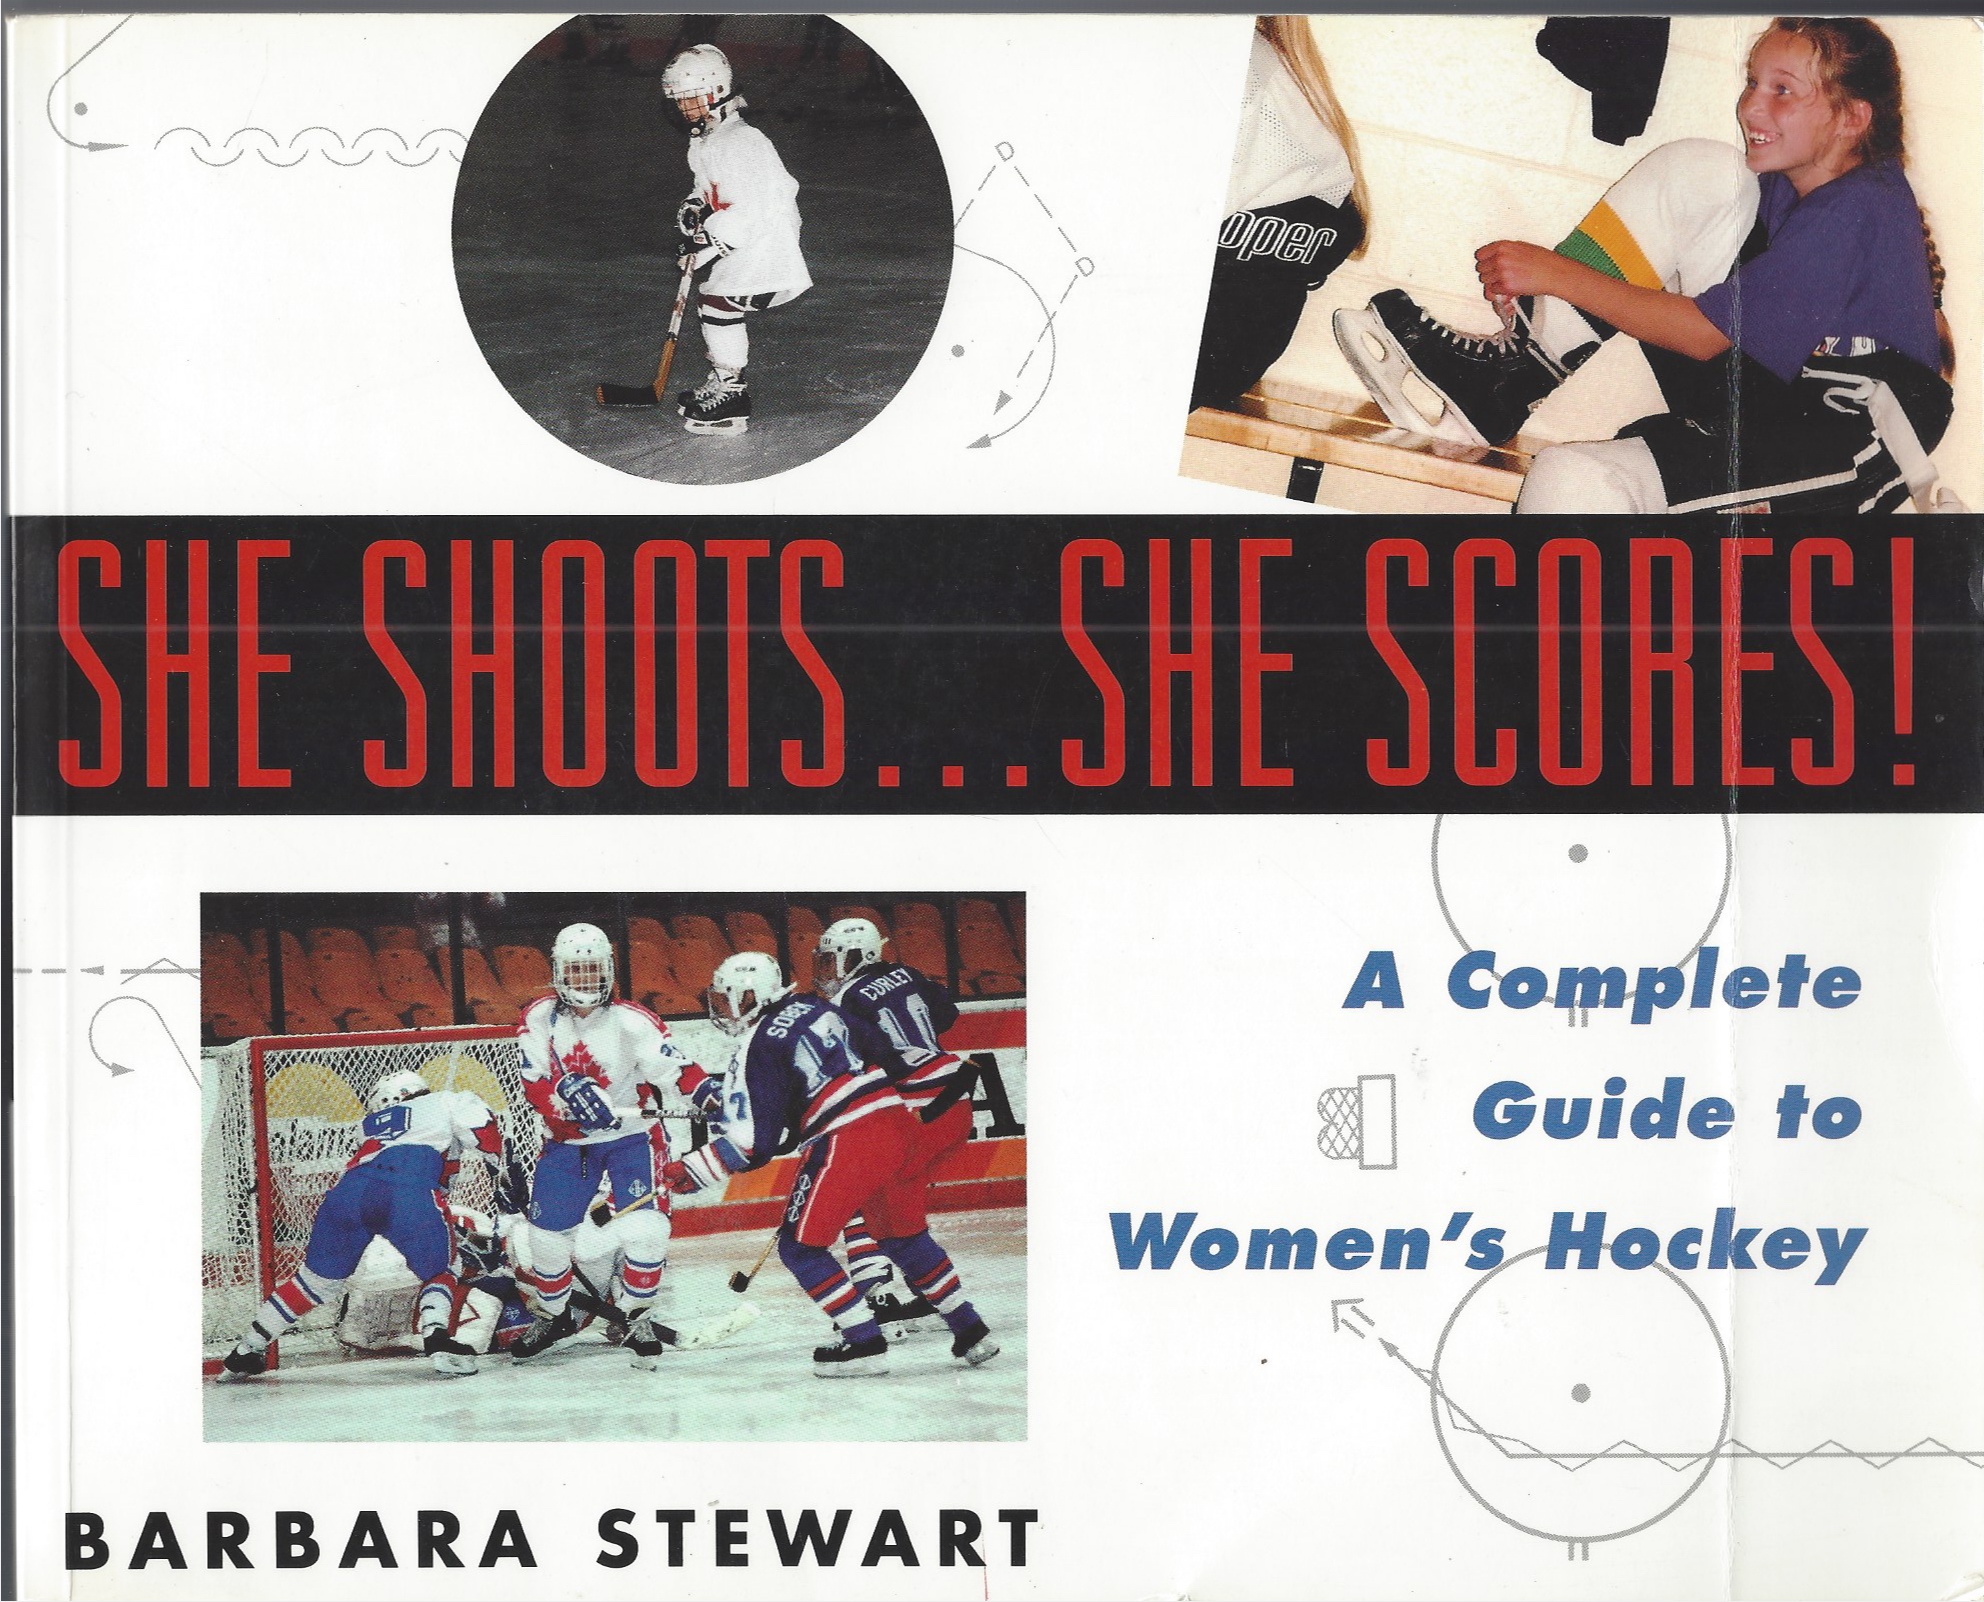 STEWART BARBARA - She Shoots... She Scores: A Complete Guide to Women's Hockey